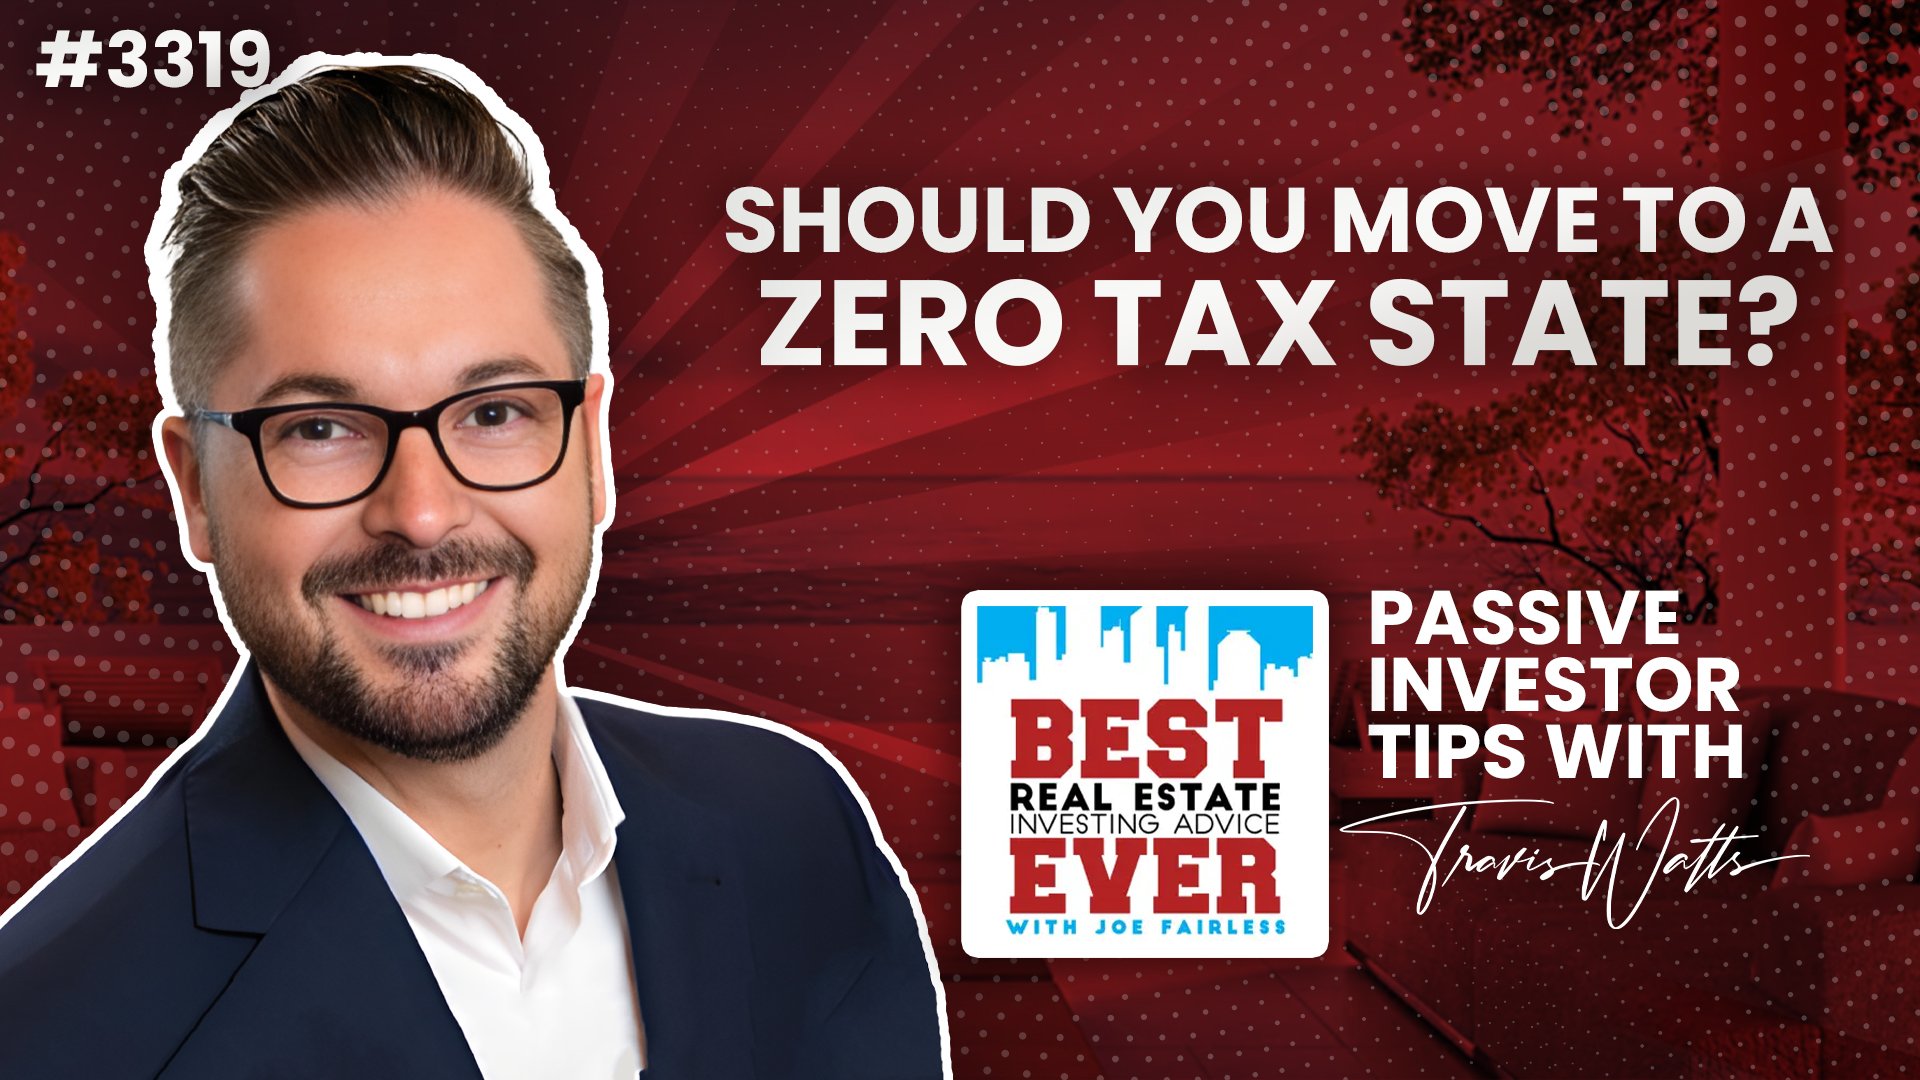 Should You Move to a Zero Tax State?